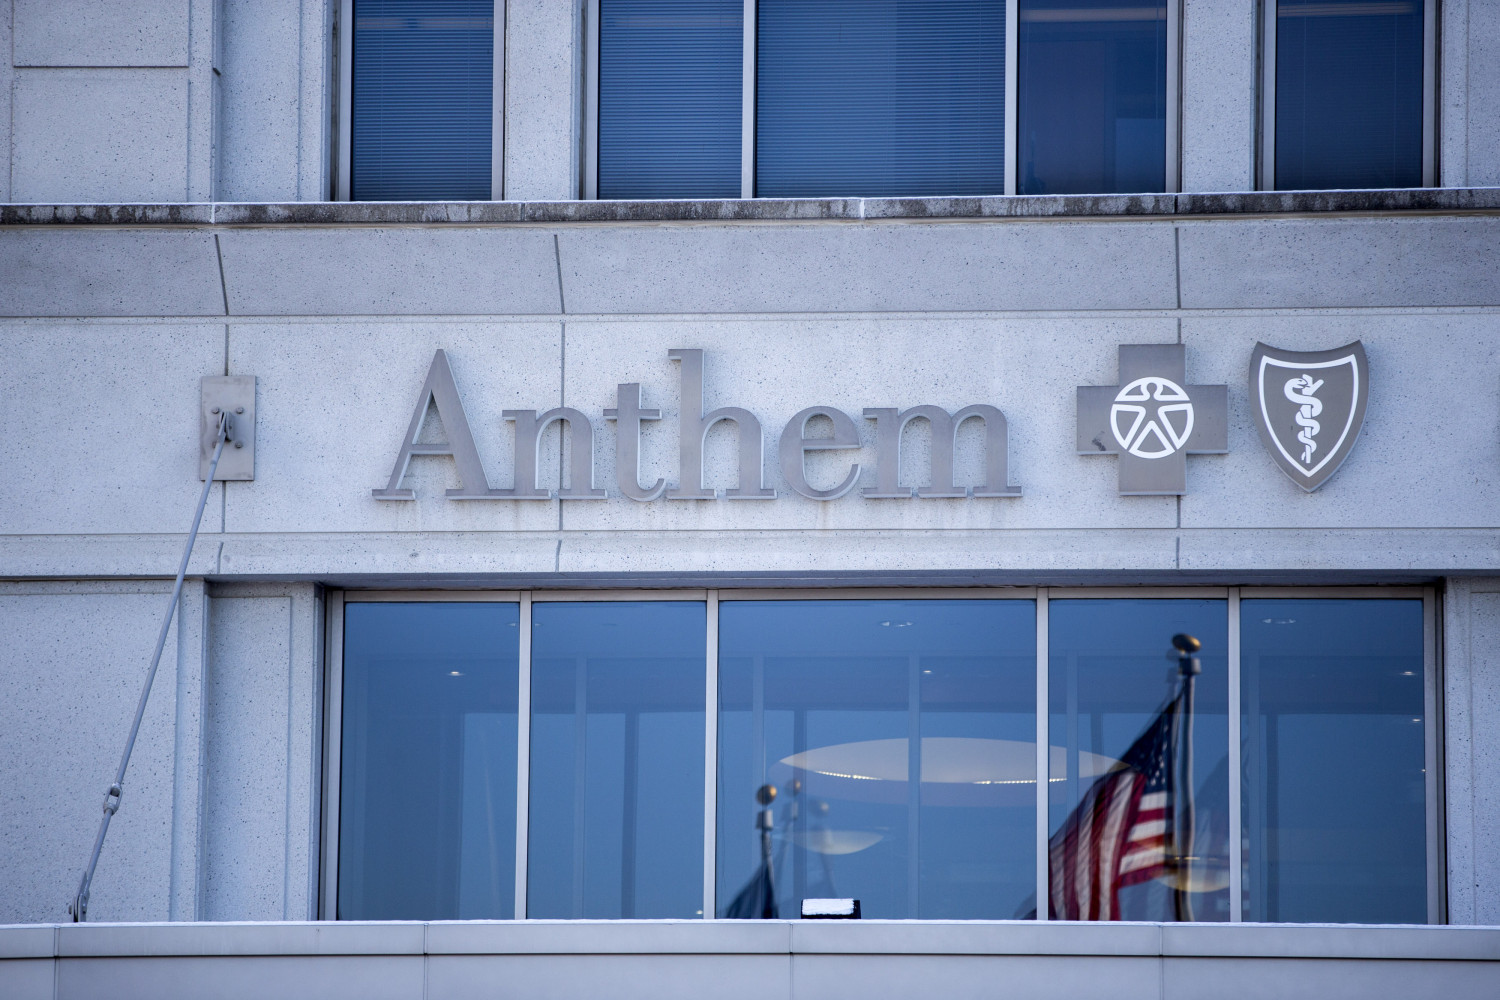 US Charges Chinese National in Hacks of Anthem, Other Businesses